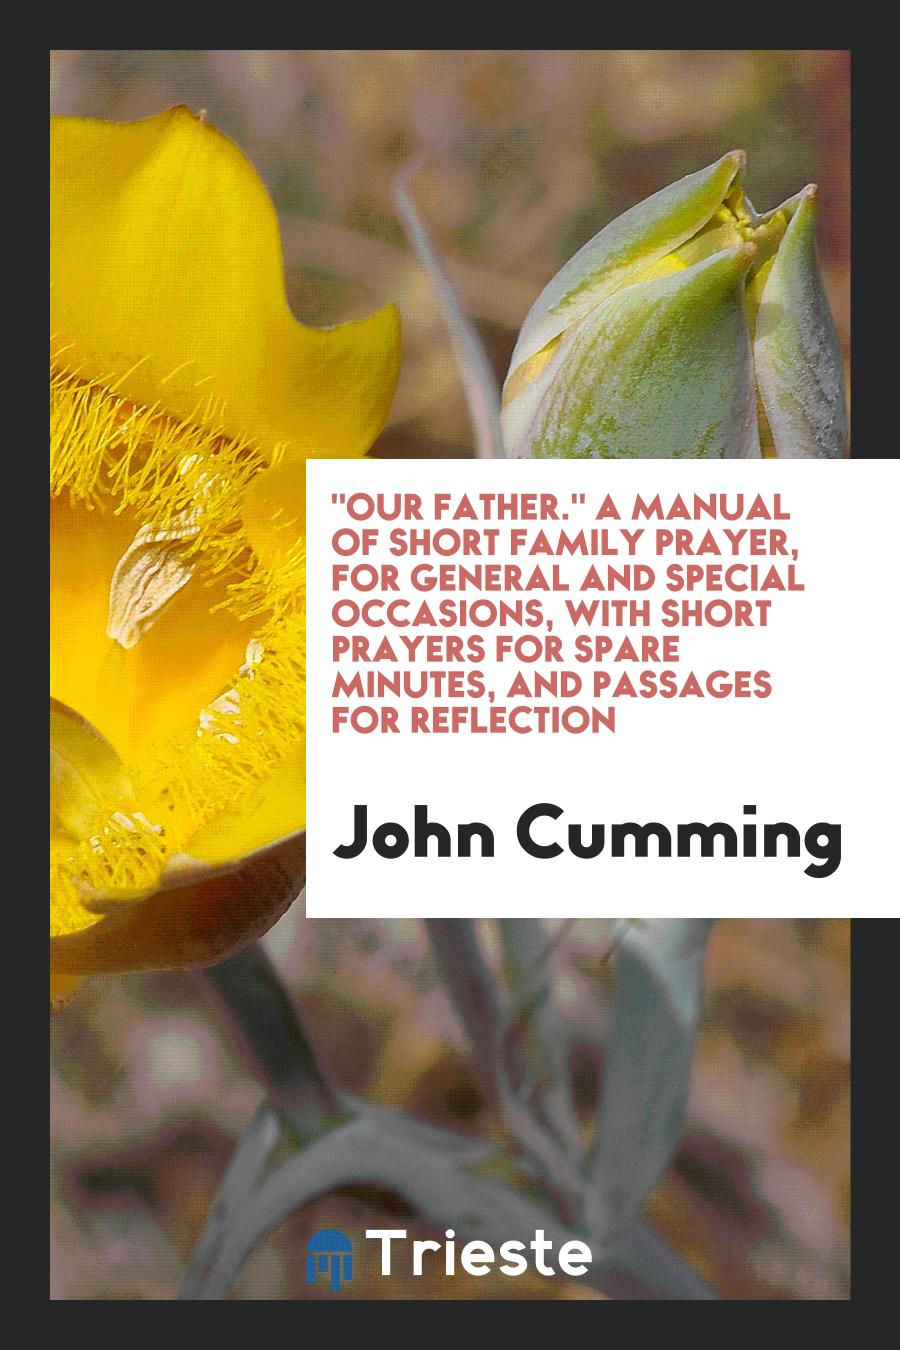 "Our Father." A Manual of Short Family Prayer, for General and Special Occasions, with Short Prayers for Spare Minutes, and Passages for Reflection